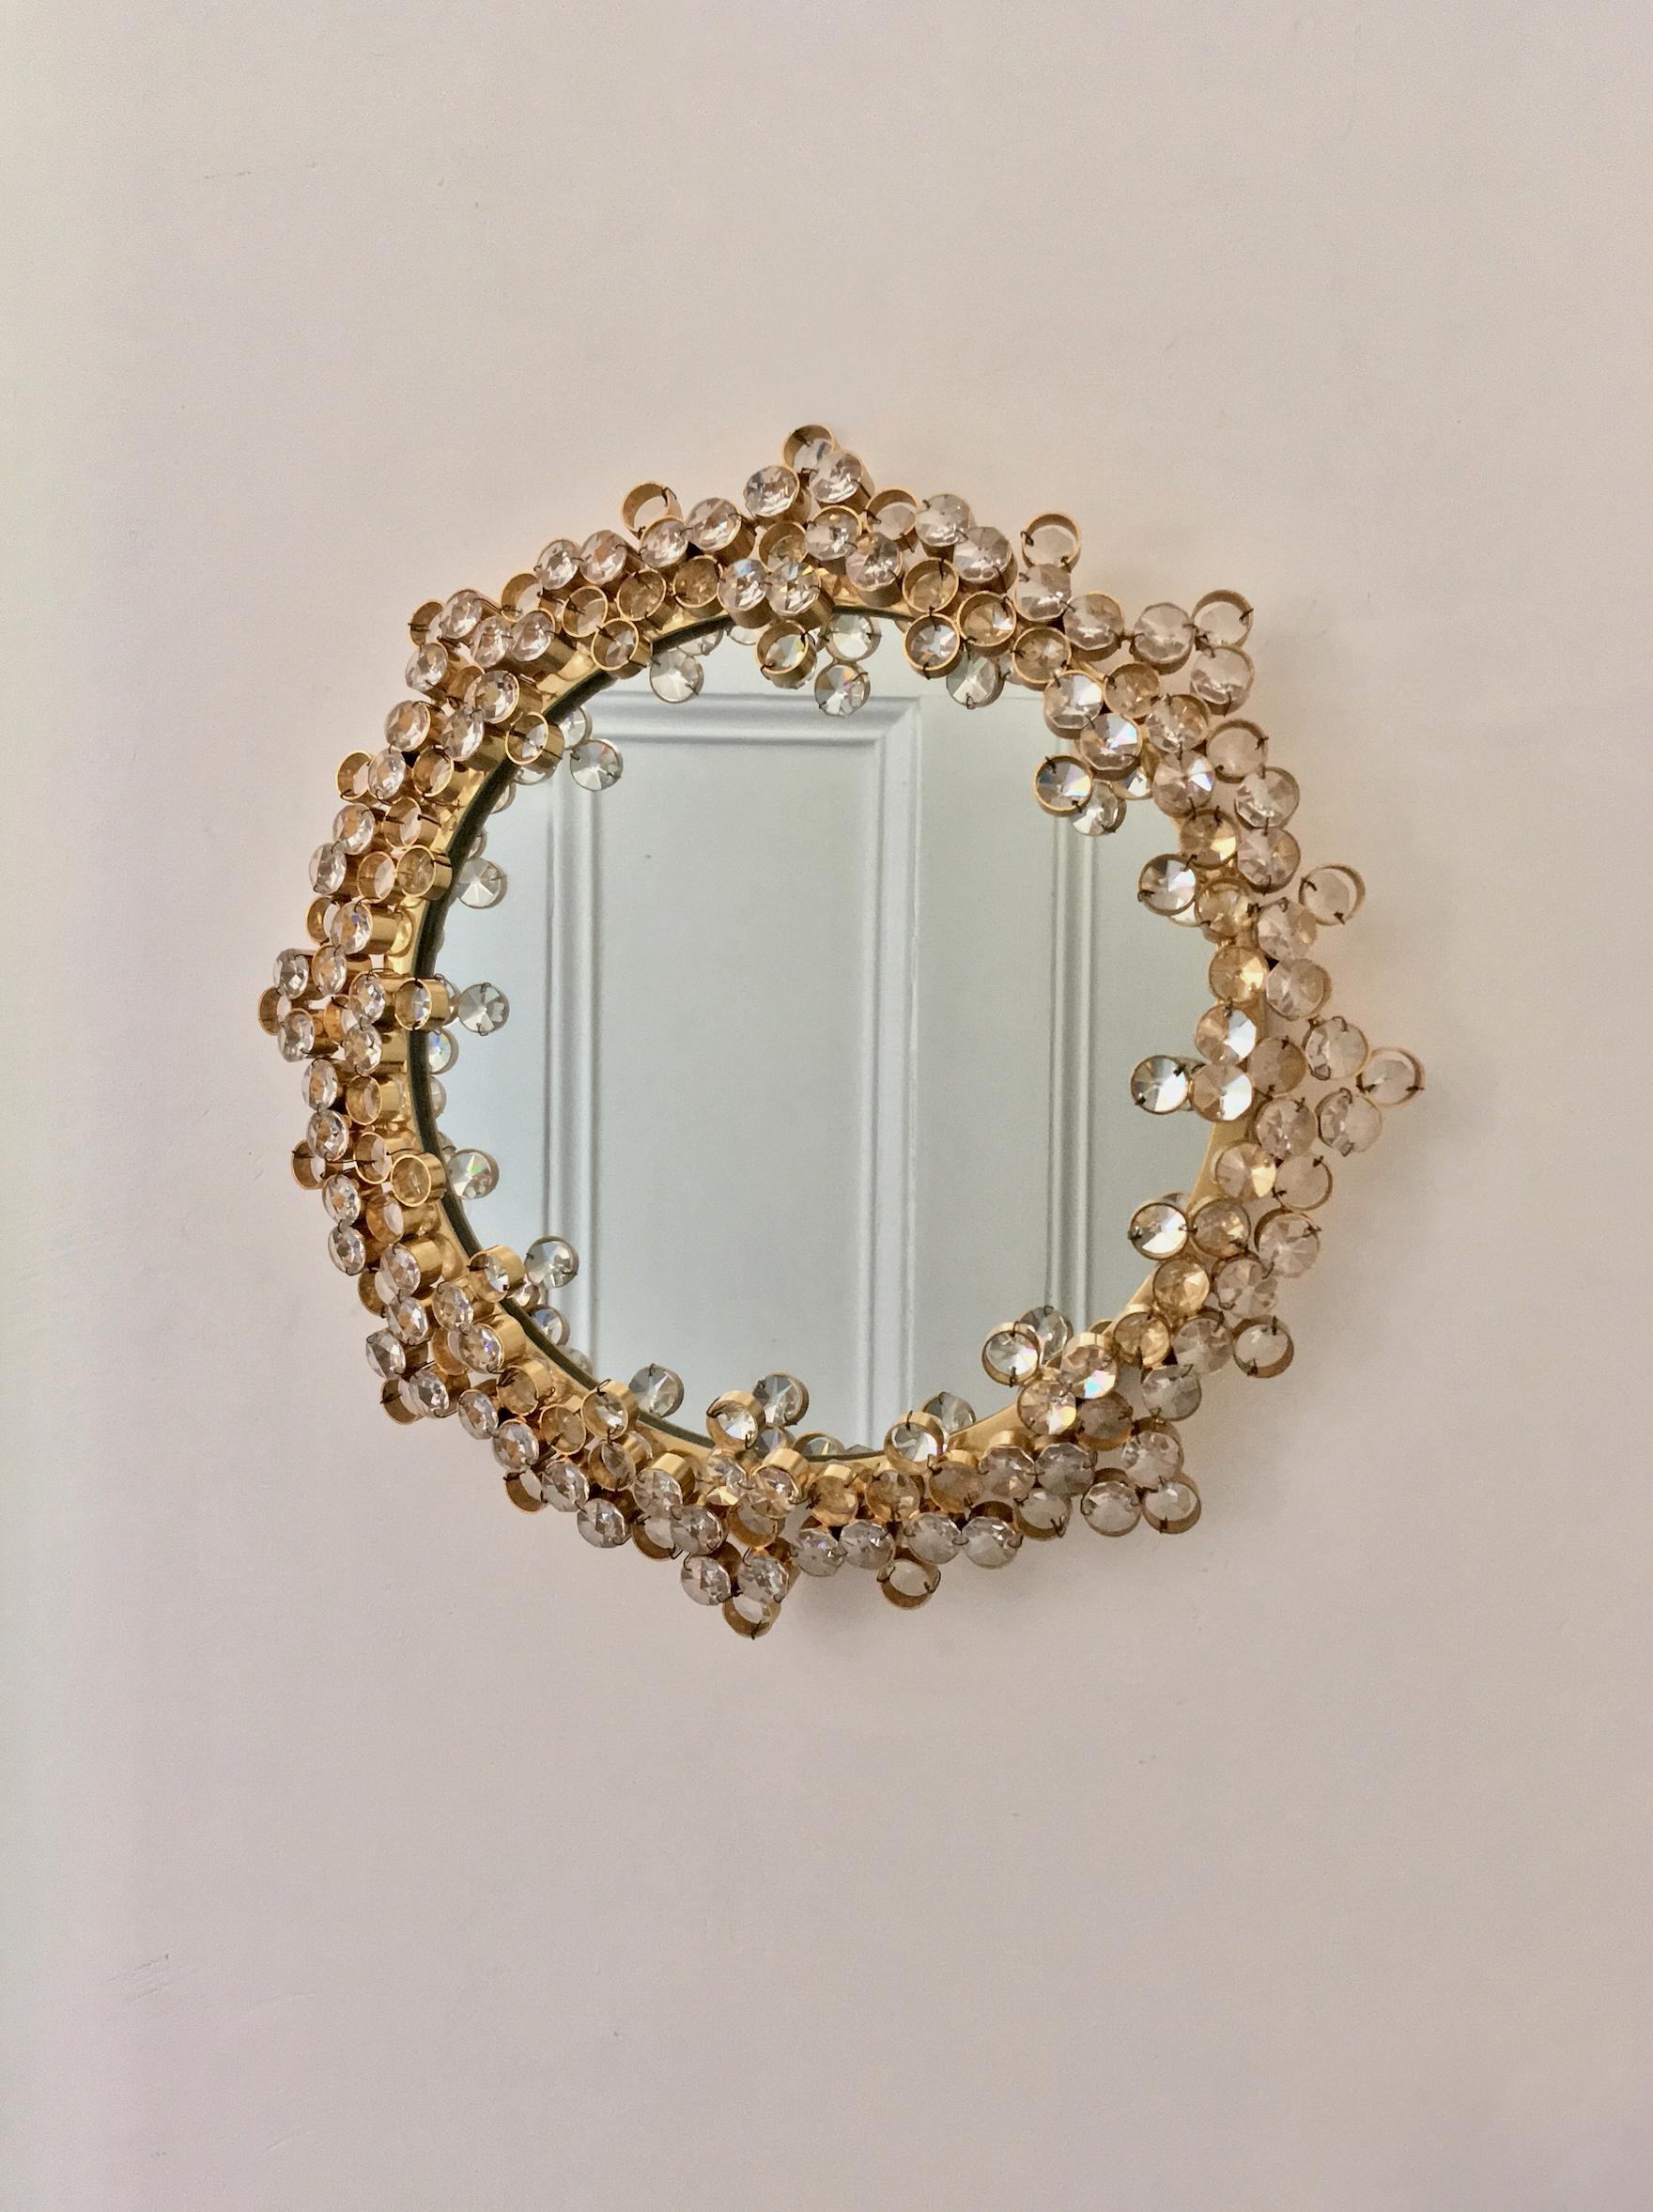 A charming wall-mounted circular vanity mirror in a gilt-brass frame, with decorative surround of high quality crystal pieces. Attributed to Palme and Walter (or Palwa), second half of the 20th century.

Well-designed and constructed piece, with a